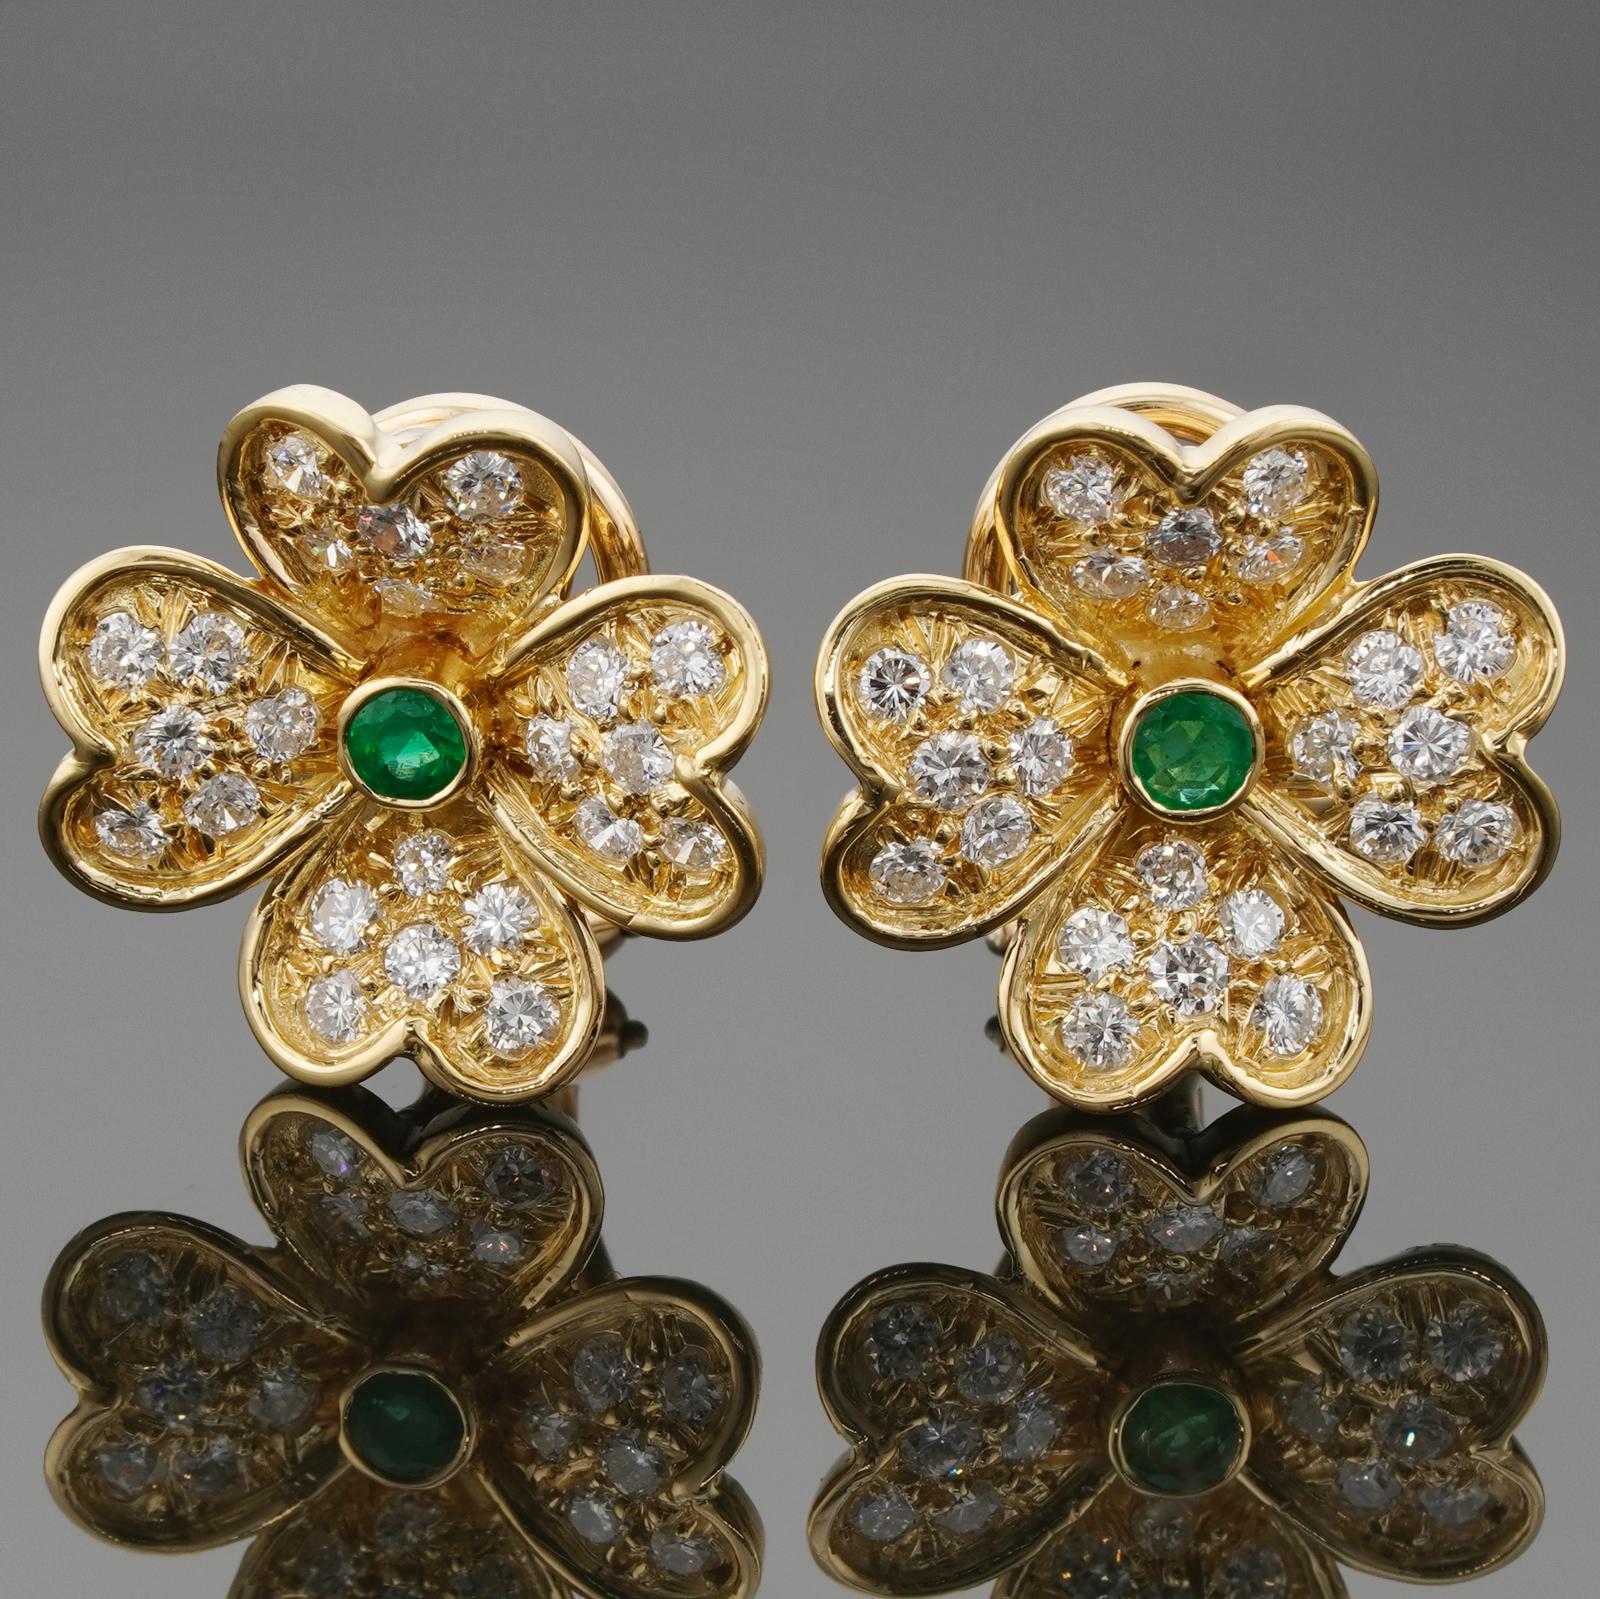 These rare Van Cleef & Arpels lever-back earrings from the gorgeous Frivole collection feature a flower design crafted in 18k yellow gold, prong-set with emeralds in the center, and surrounded with 4 petals pave-set with round brilliant E-F